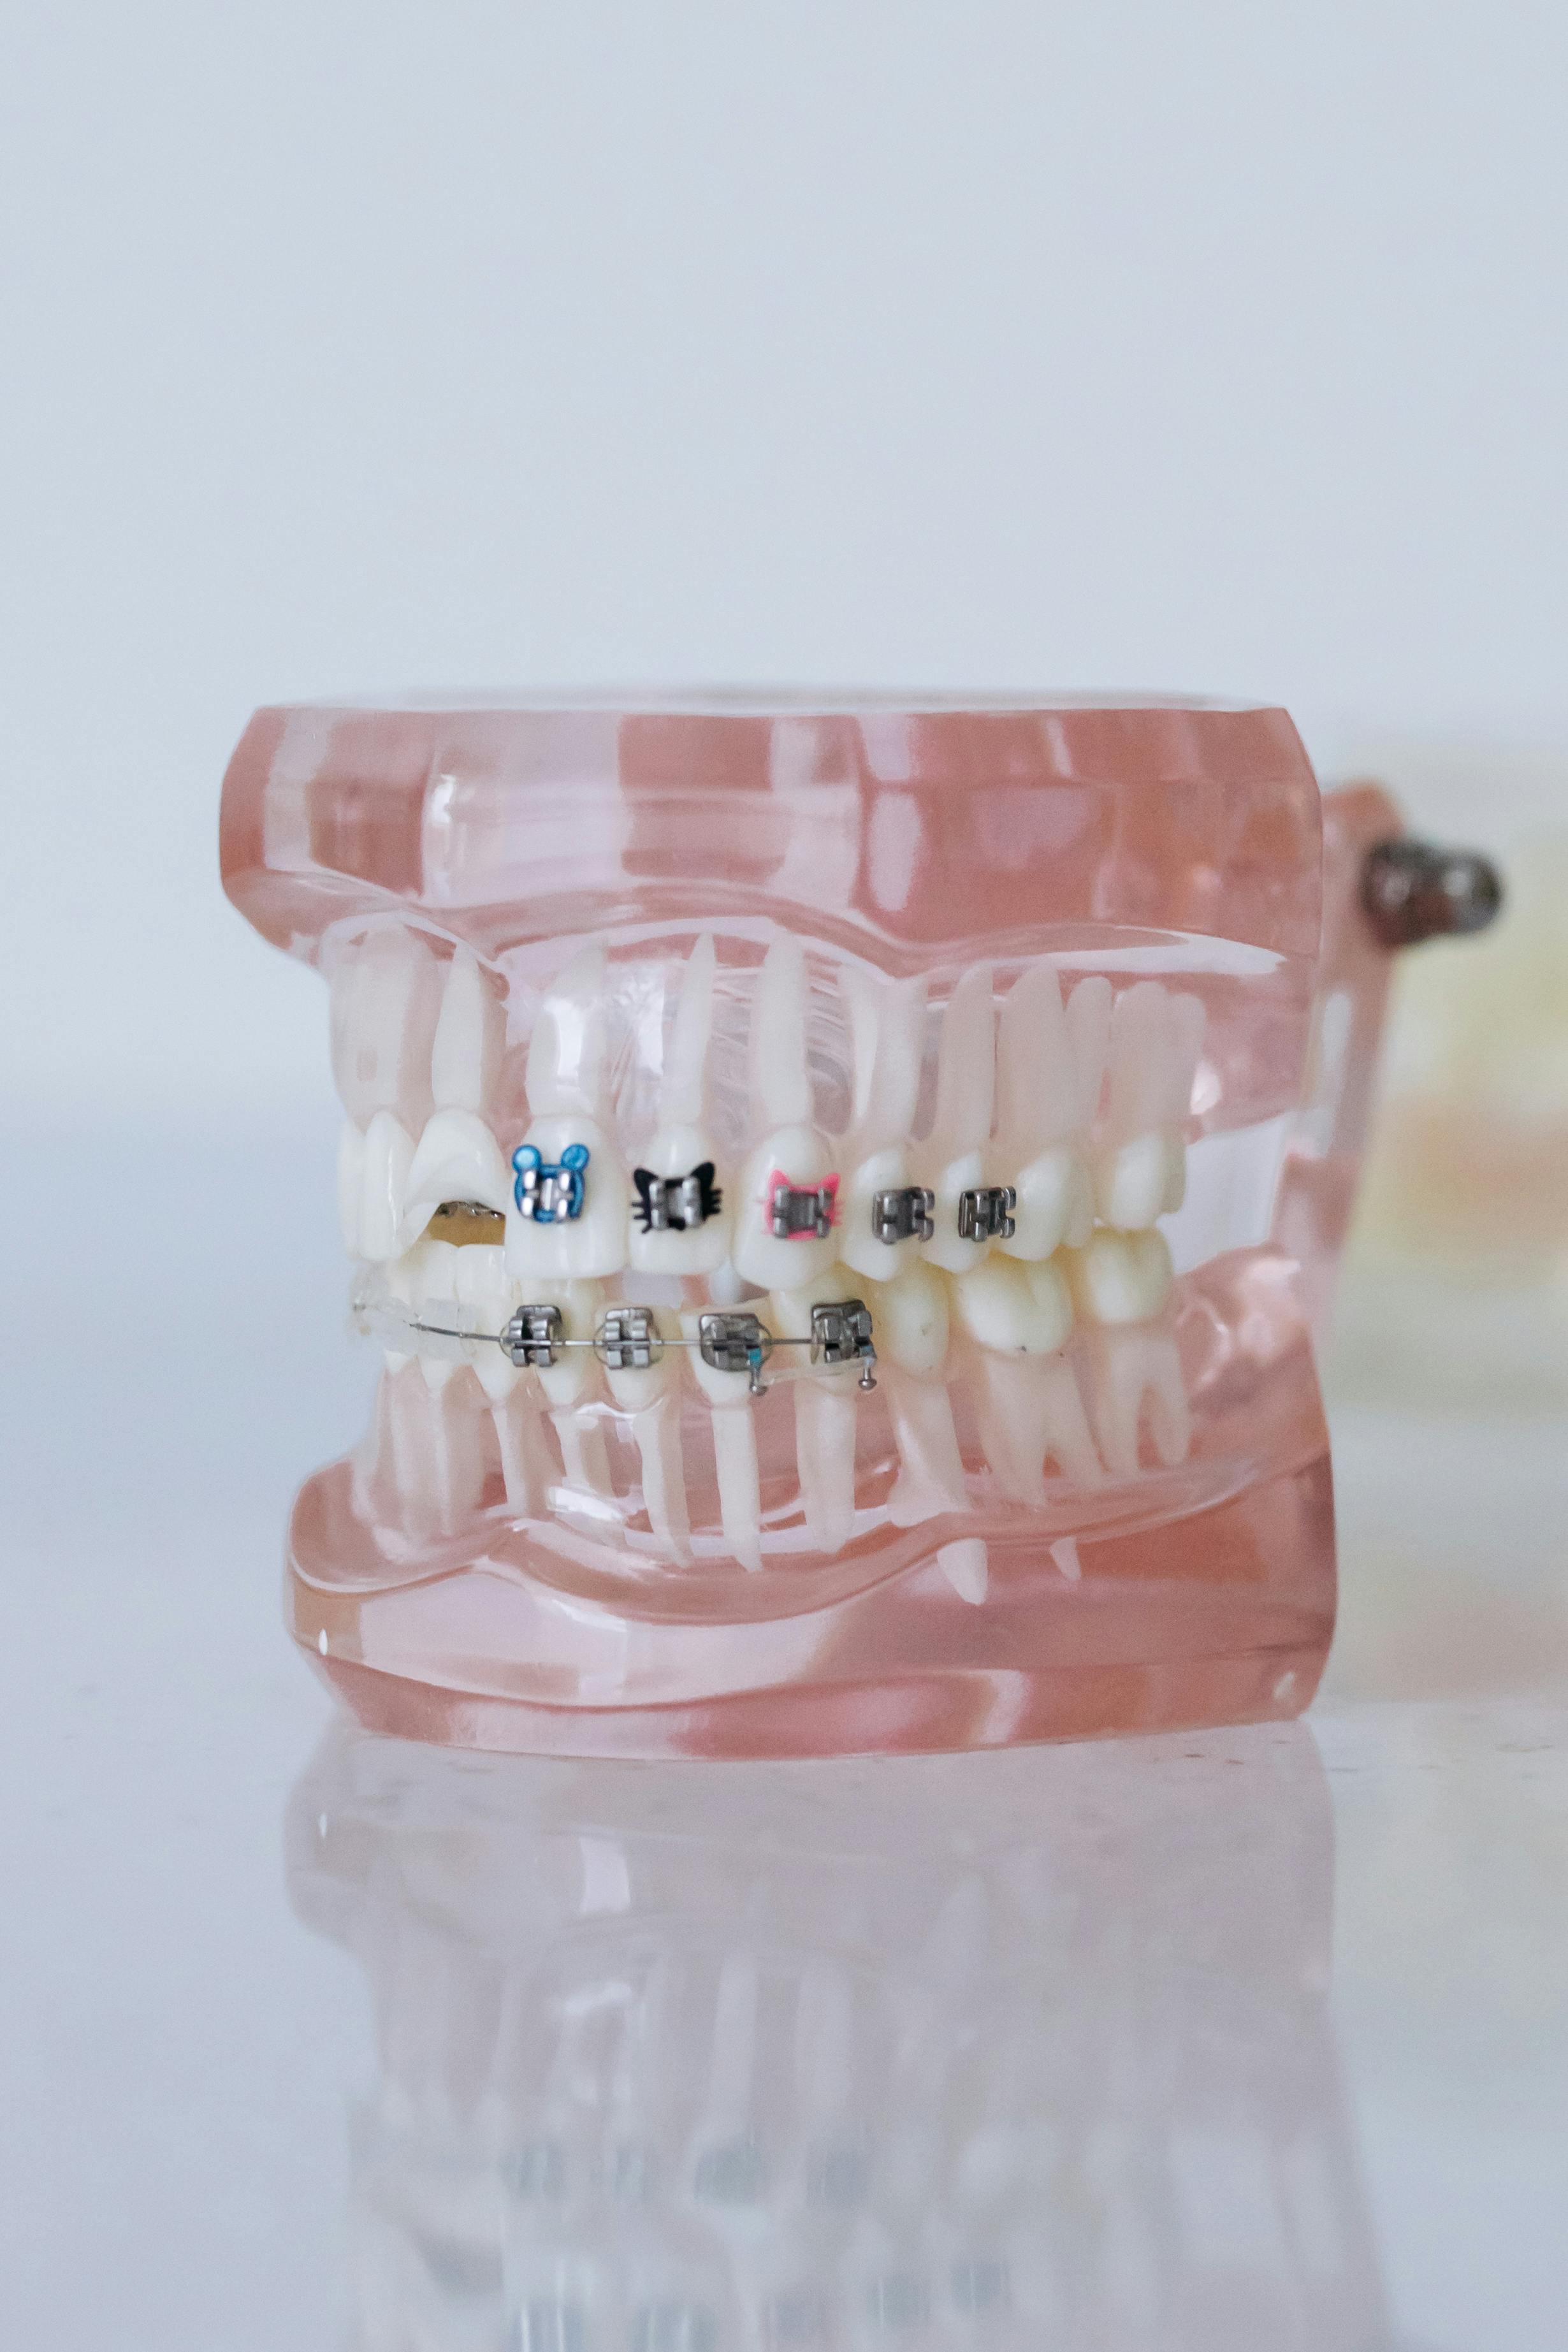 60+ Clip On Braces For Teeth Stock Photos, Pictures & Royalty-Free